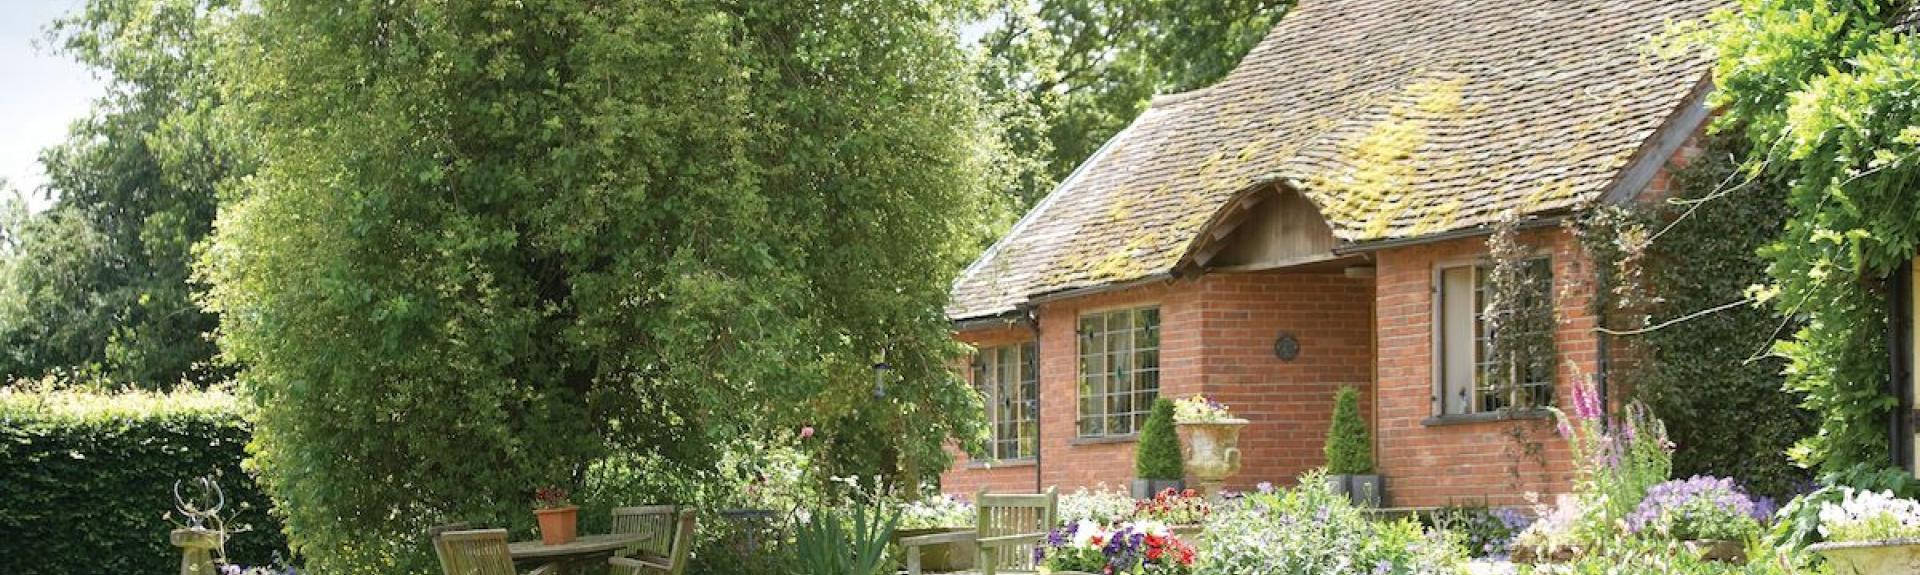 Exterior of s brick-built period garden cottage backed by mature woodland and in front of a lawn with flower-filled borders.